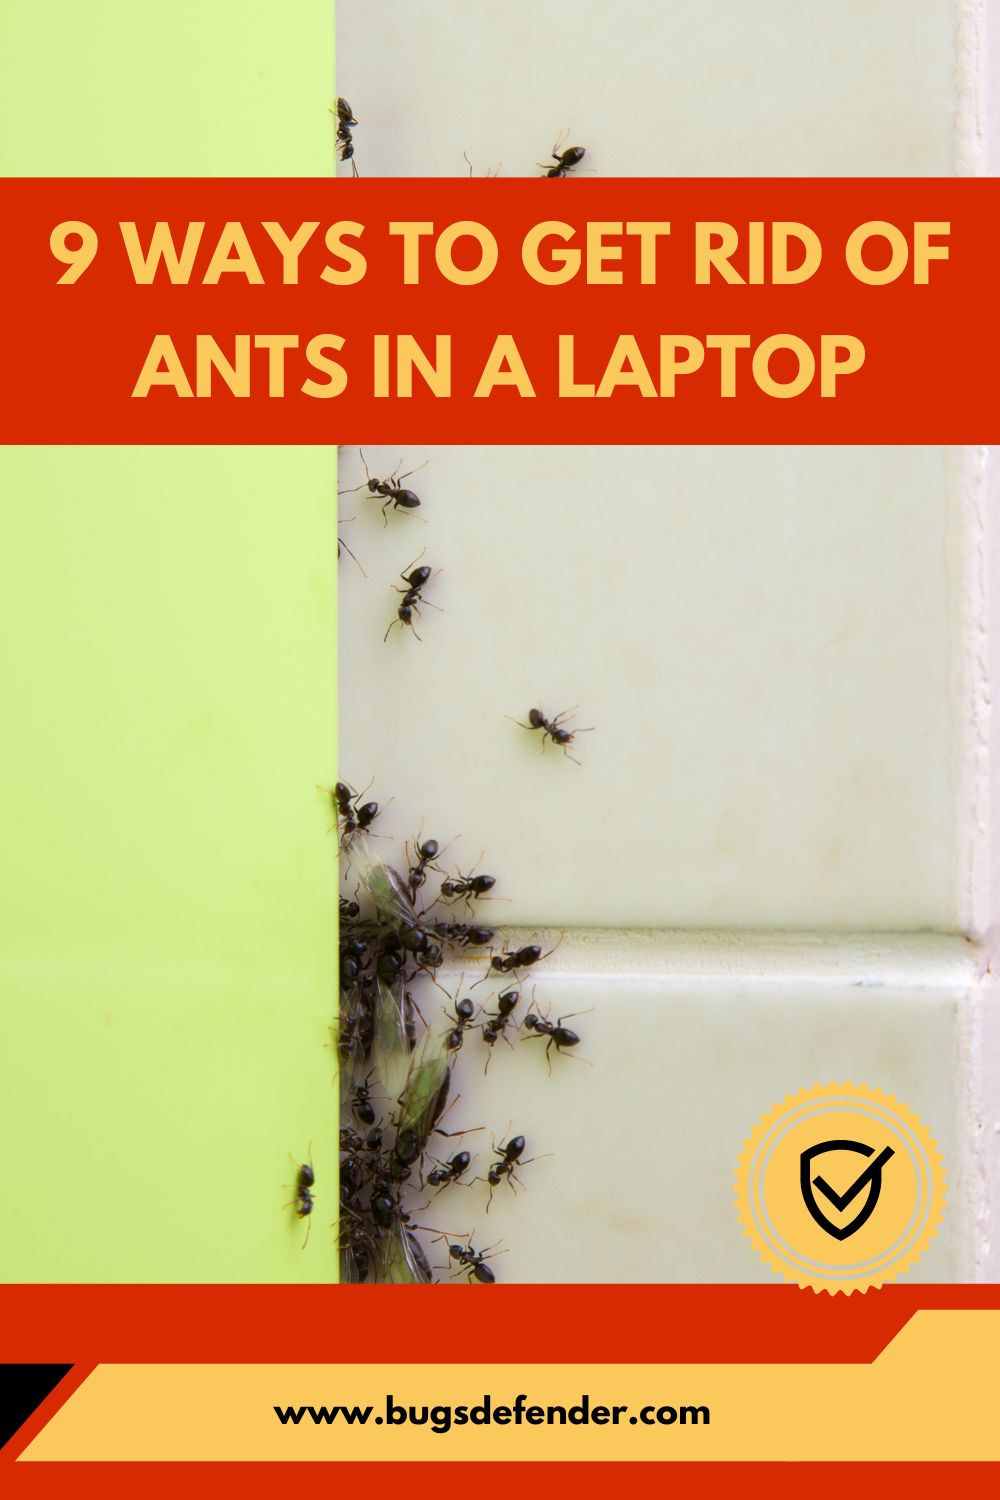 9 Ways to Get Rid of Ants in a Laptop pin2